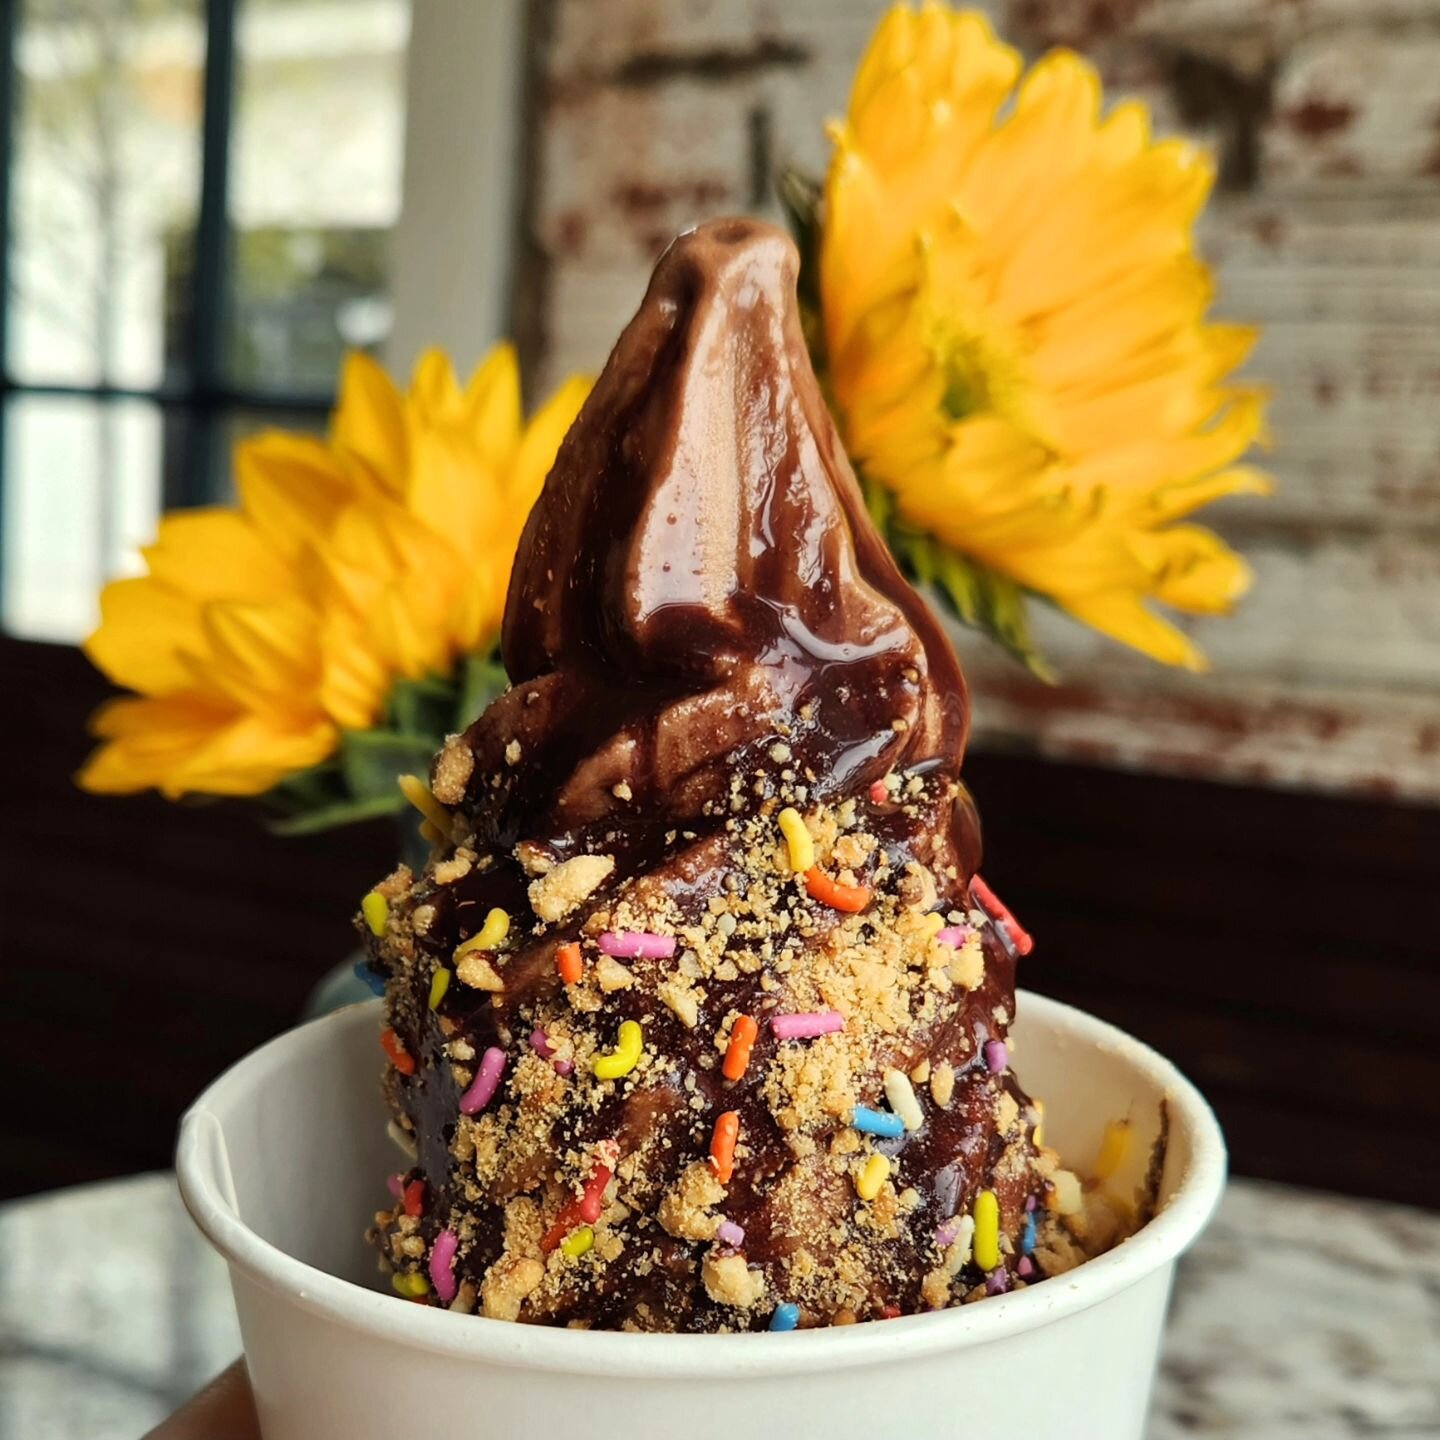 It may be cloudy outside, but it's nice and cozy in our caf&eacute; seating! Here's our oatmilk chocolate decked out in fudge sauce and peanut crunch 🌻🍦🍫🥜